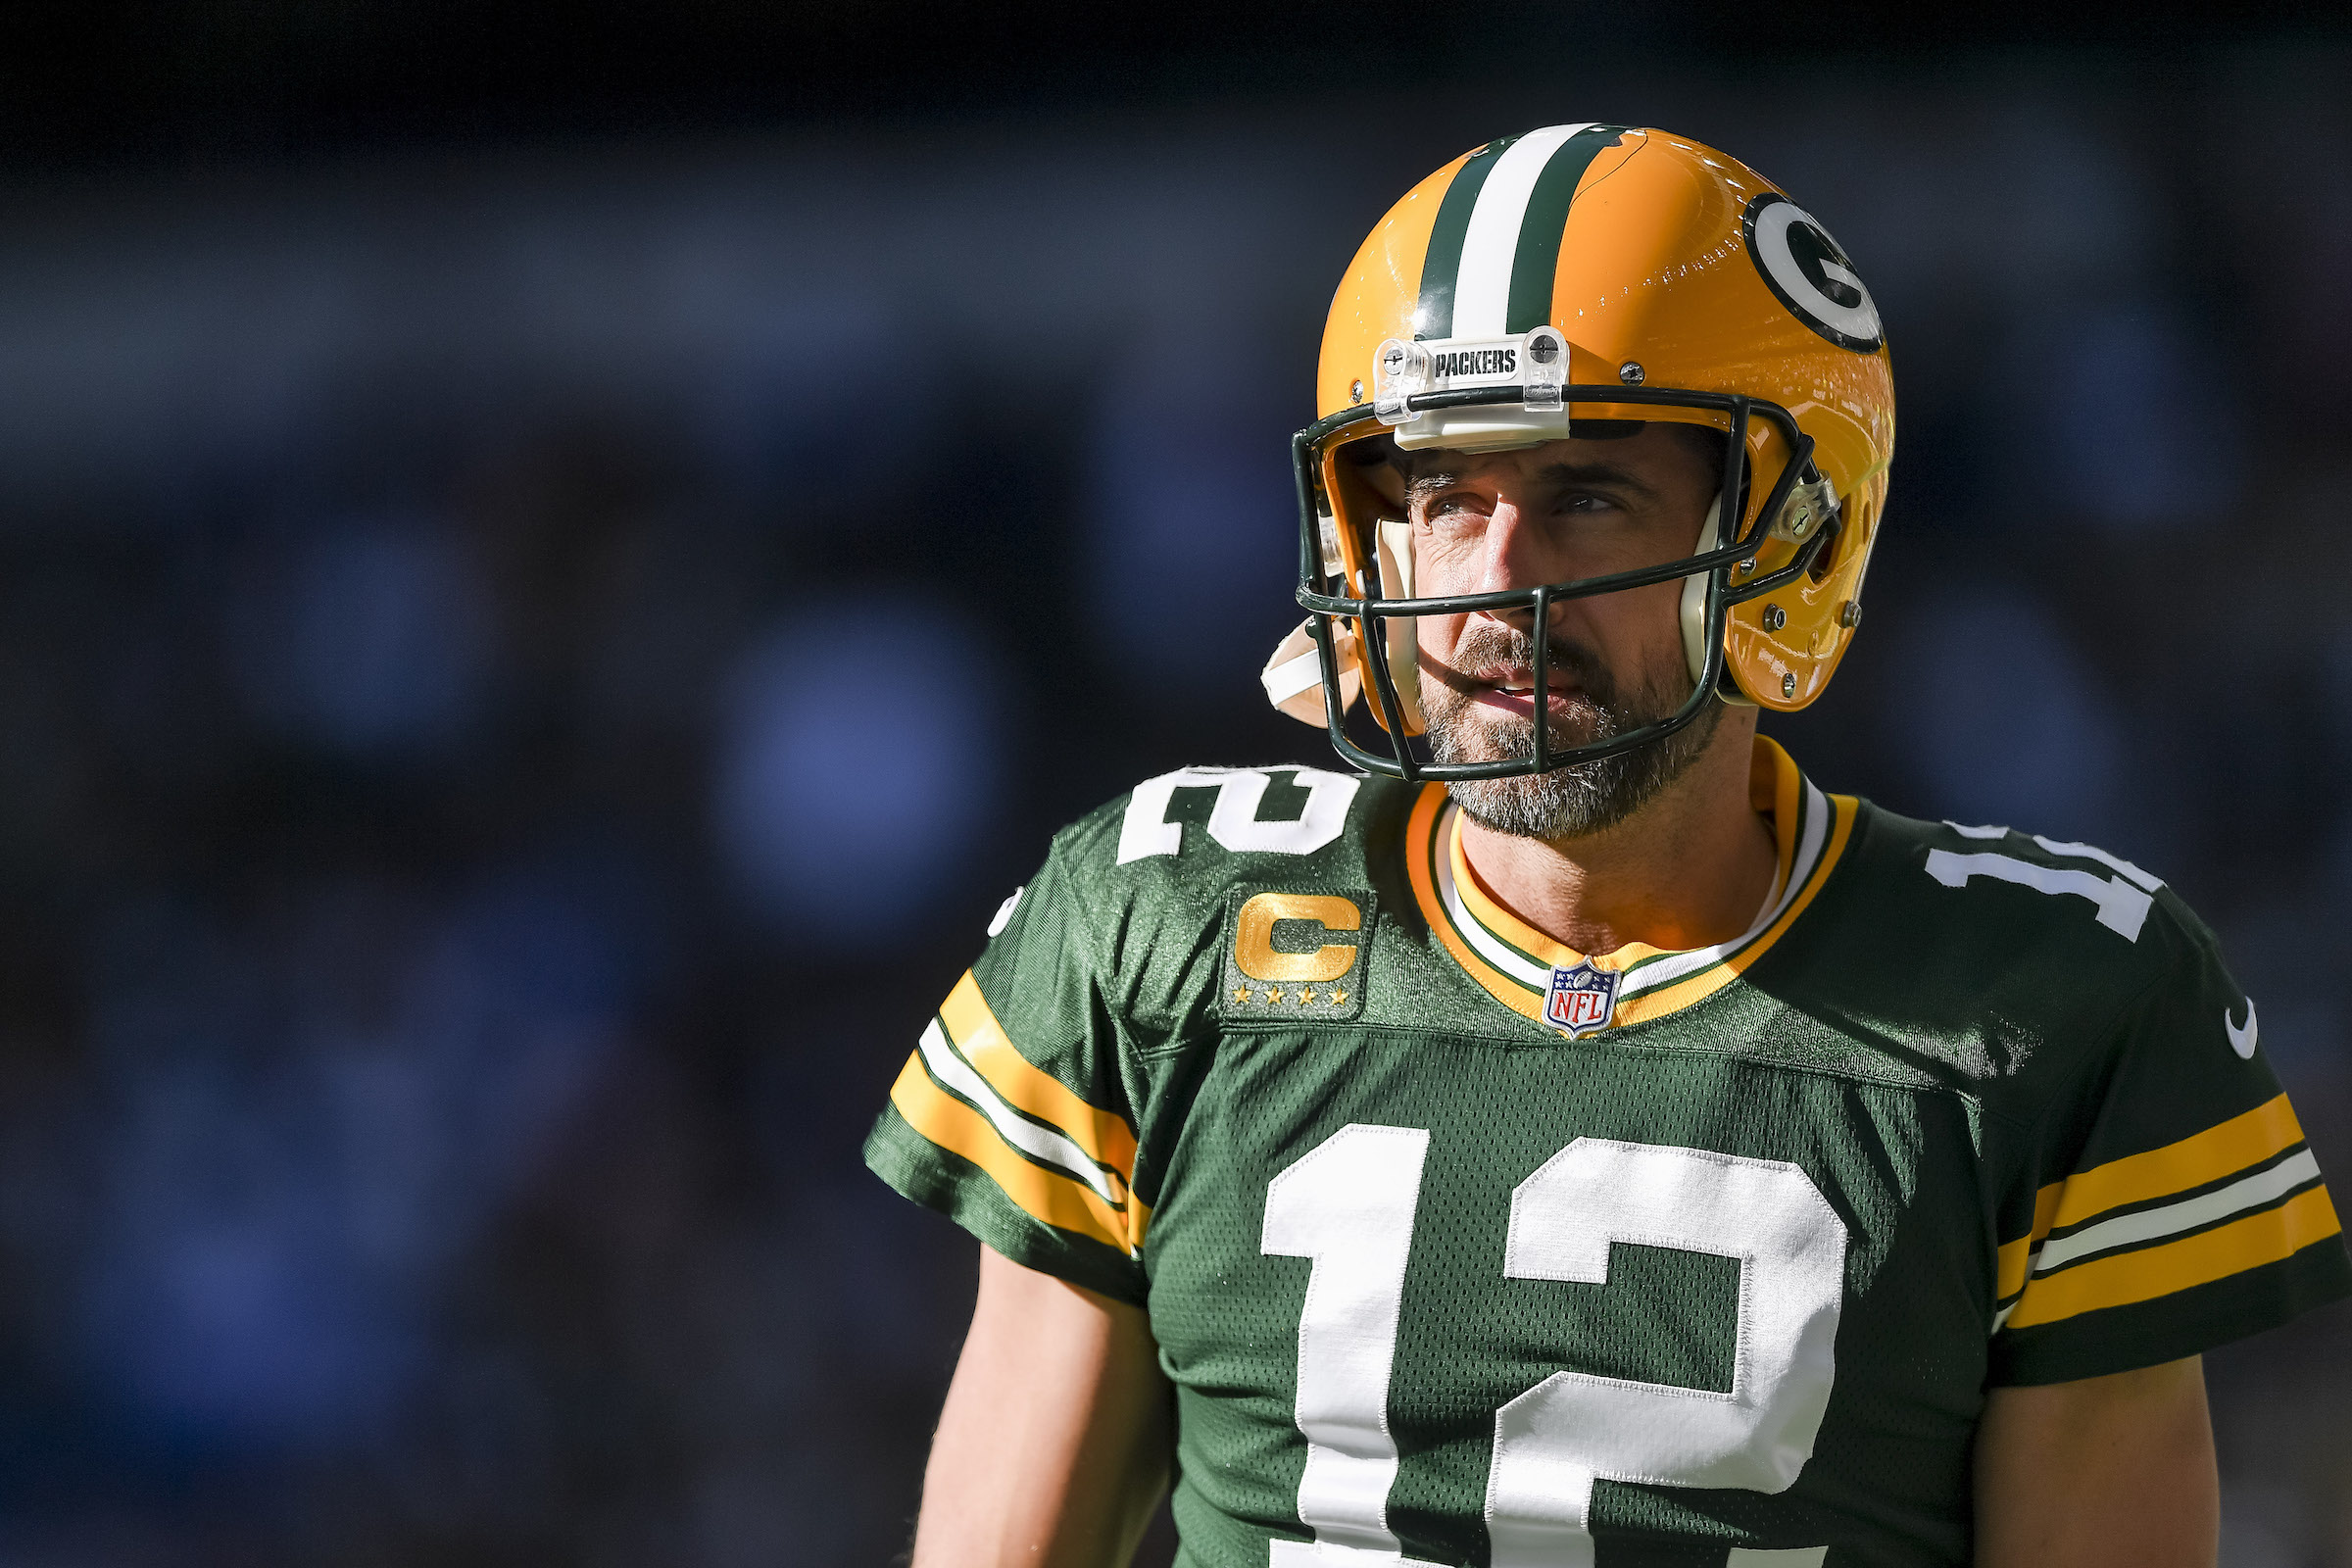 LONDON, ENGLAND - OCTOBER 09: Aaron Rodgers of Green Bay Packers looks on during the NFL match between New York Giants and Green Bay Packers at Tottenham Hotspur Stadium on October 9, 2022 in London, England. (Photo by Vincent Mignott/DeFodi Images via Getty Images)